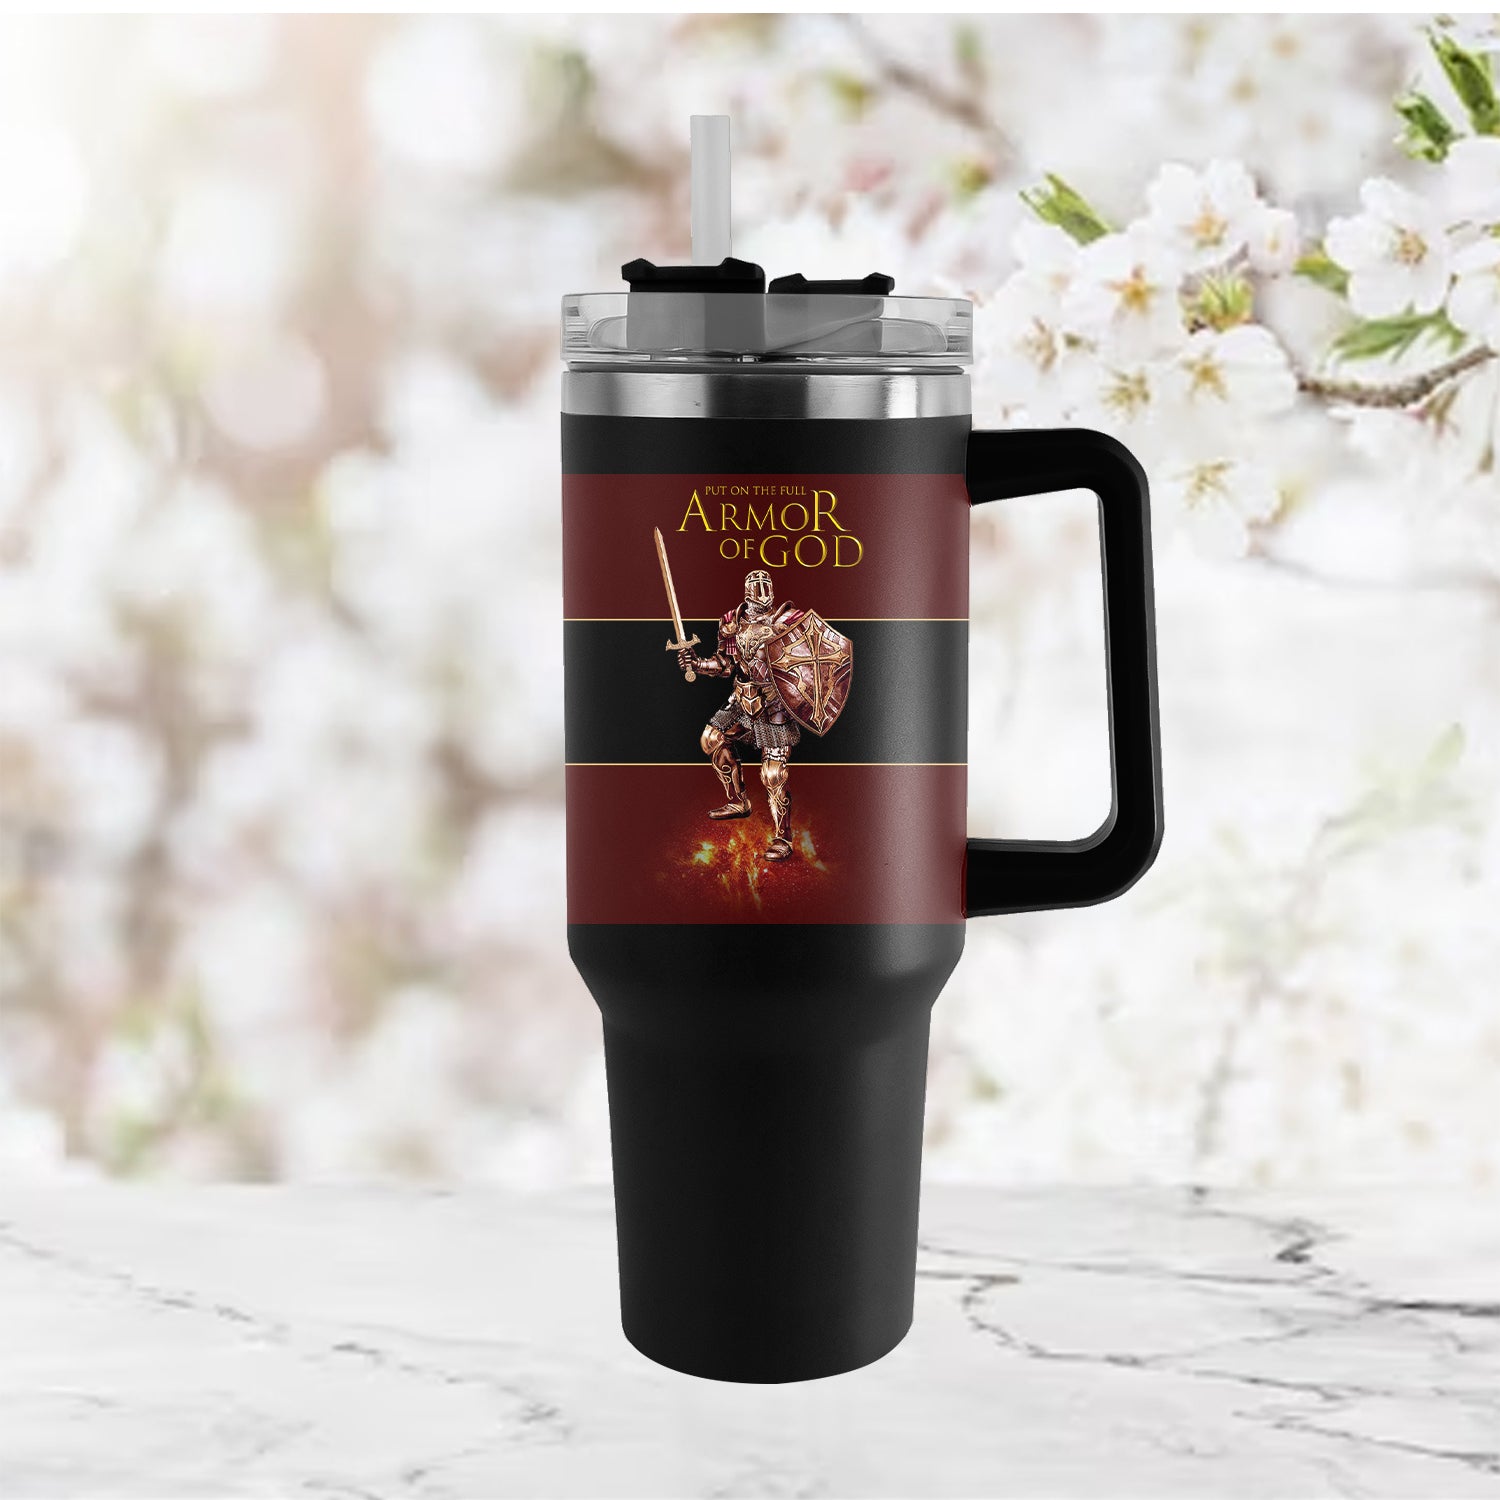 Christianartbag Drinkware, Put On The Full Armor Of God Personalized Tumbler With Handle, Personalized Tumbler With Handle, Tumbler With Handle, Christmas Gift, CAB02280823 - Christian Art Bag